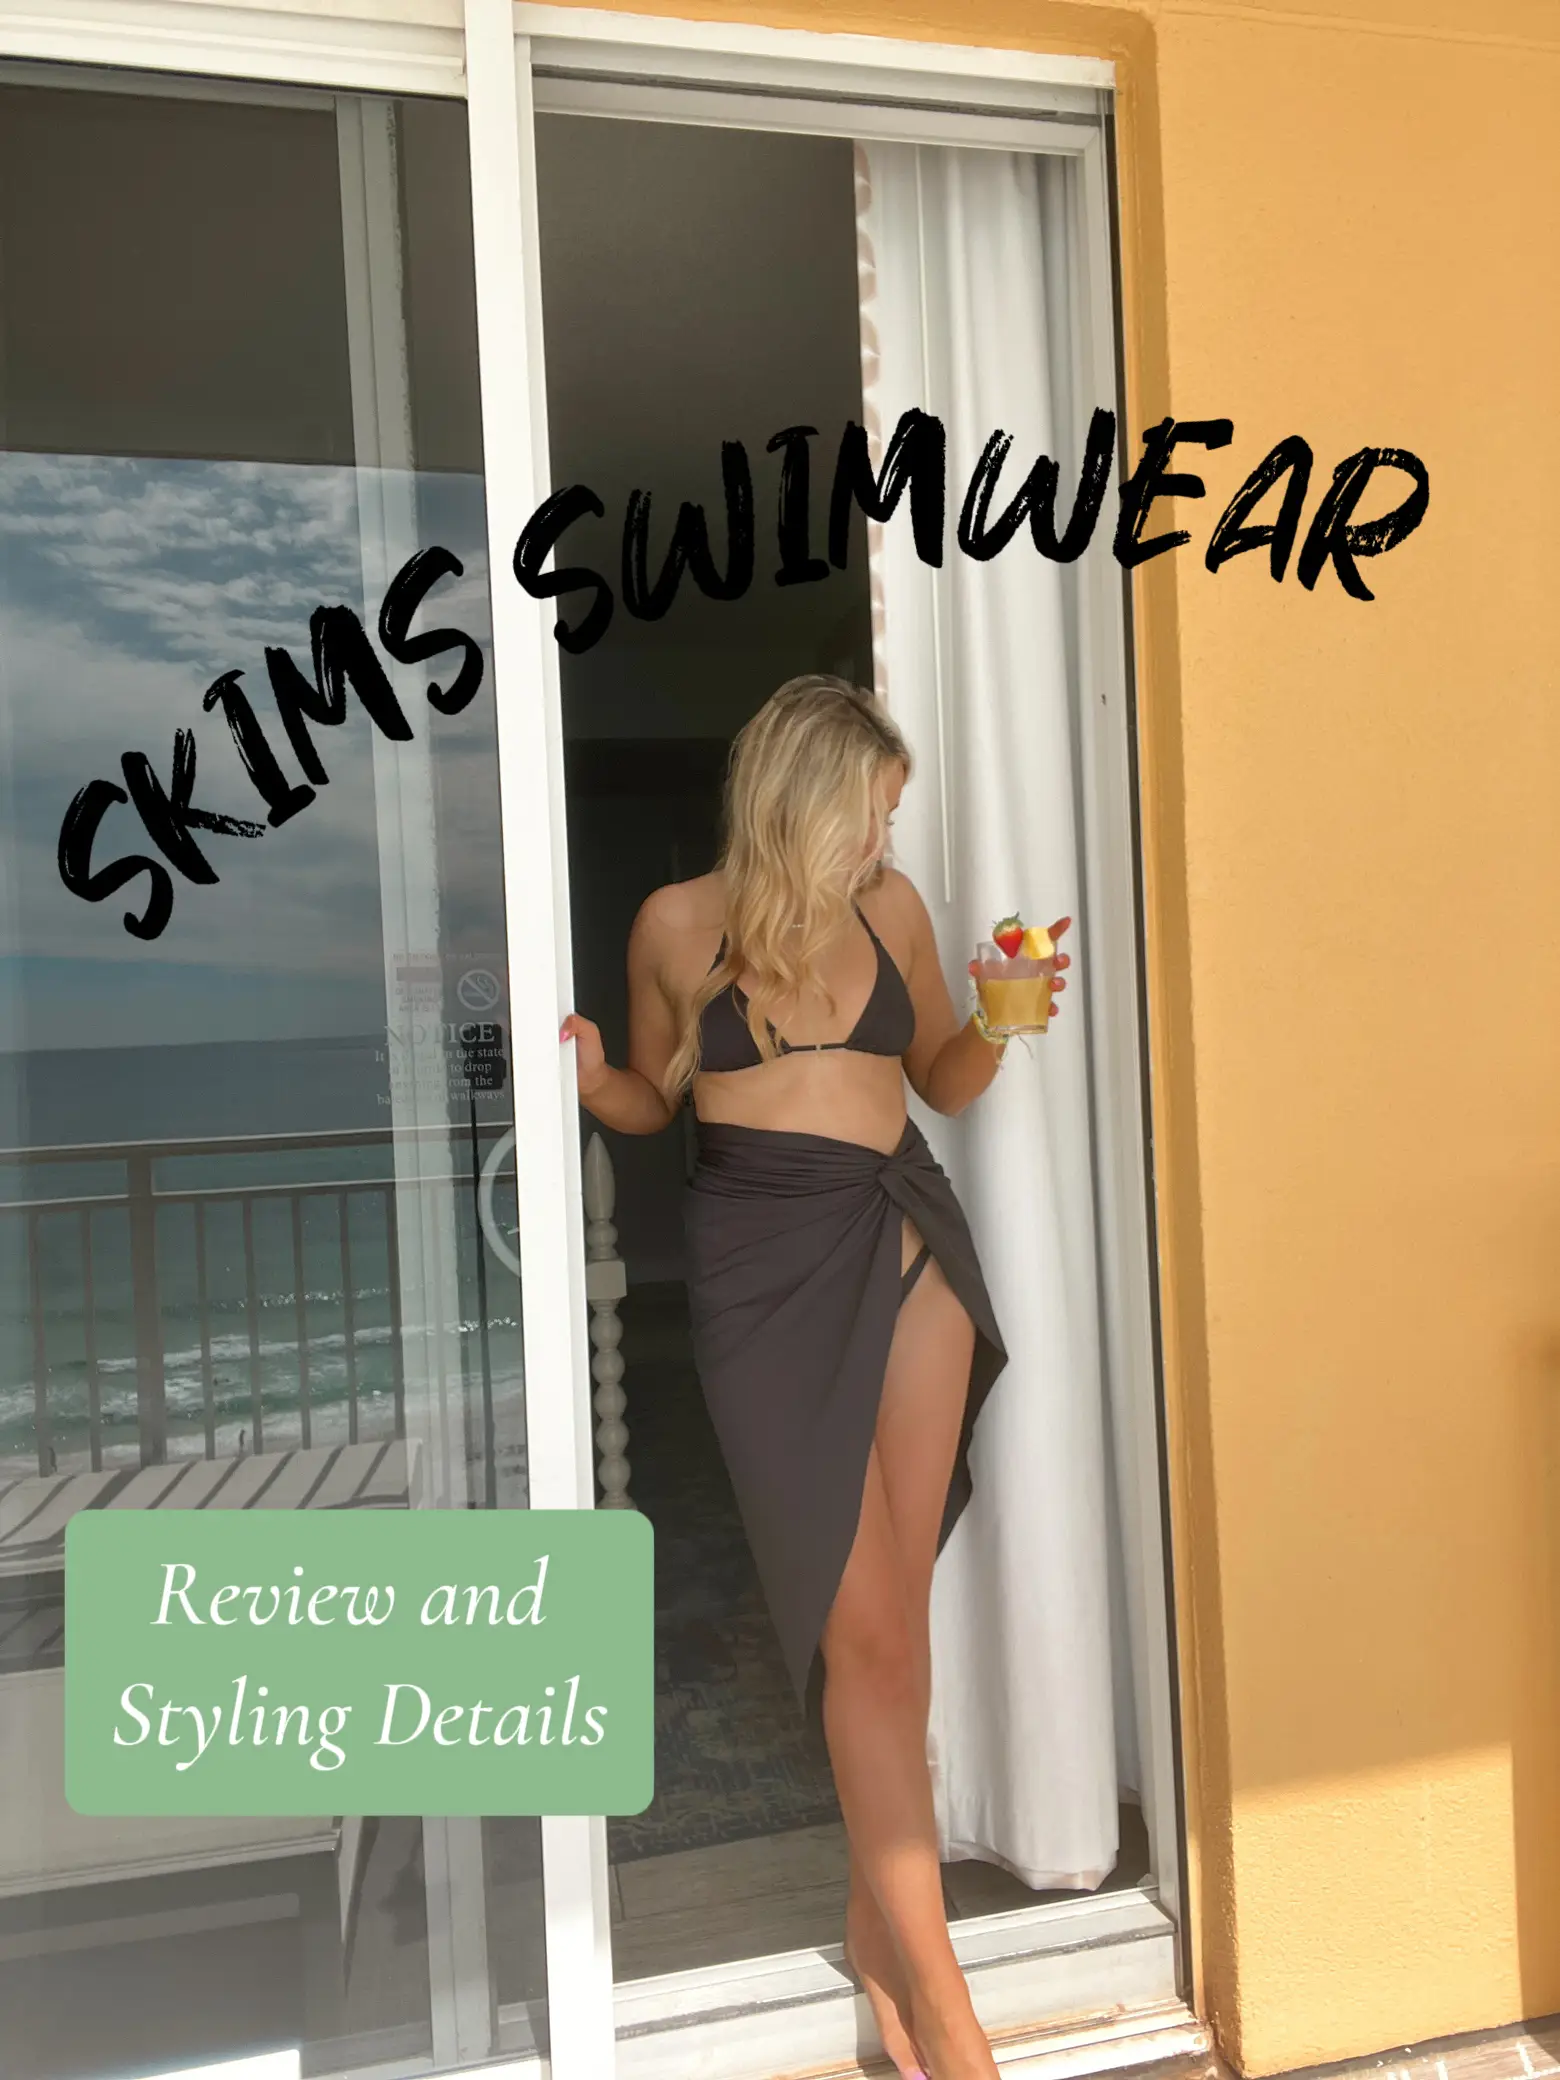 Skims Swimwear Review 👙, Gallery posted by Hunter Noelle